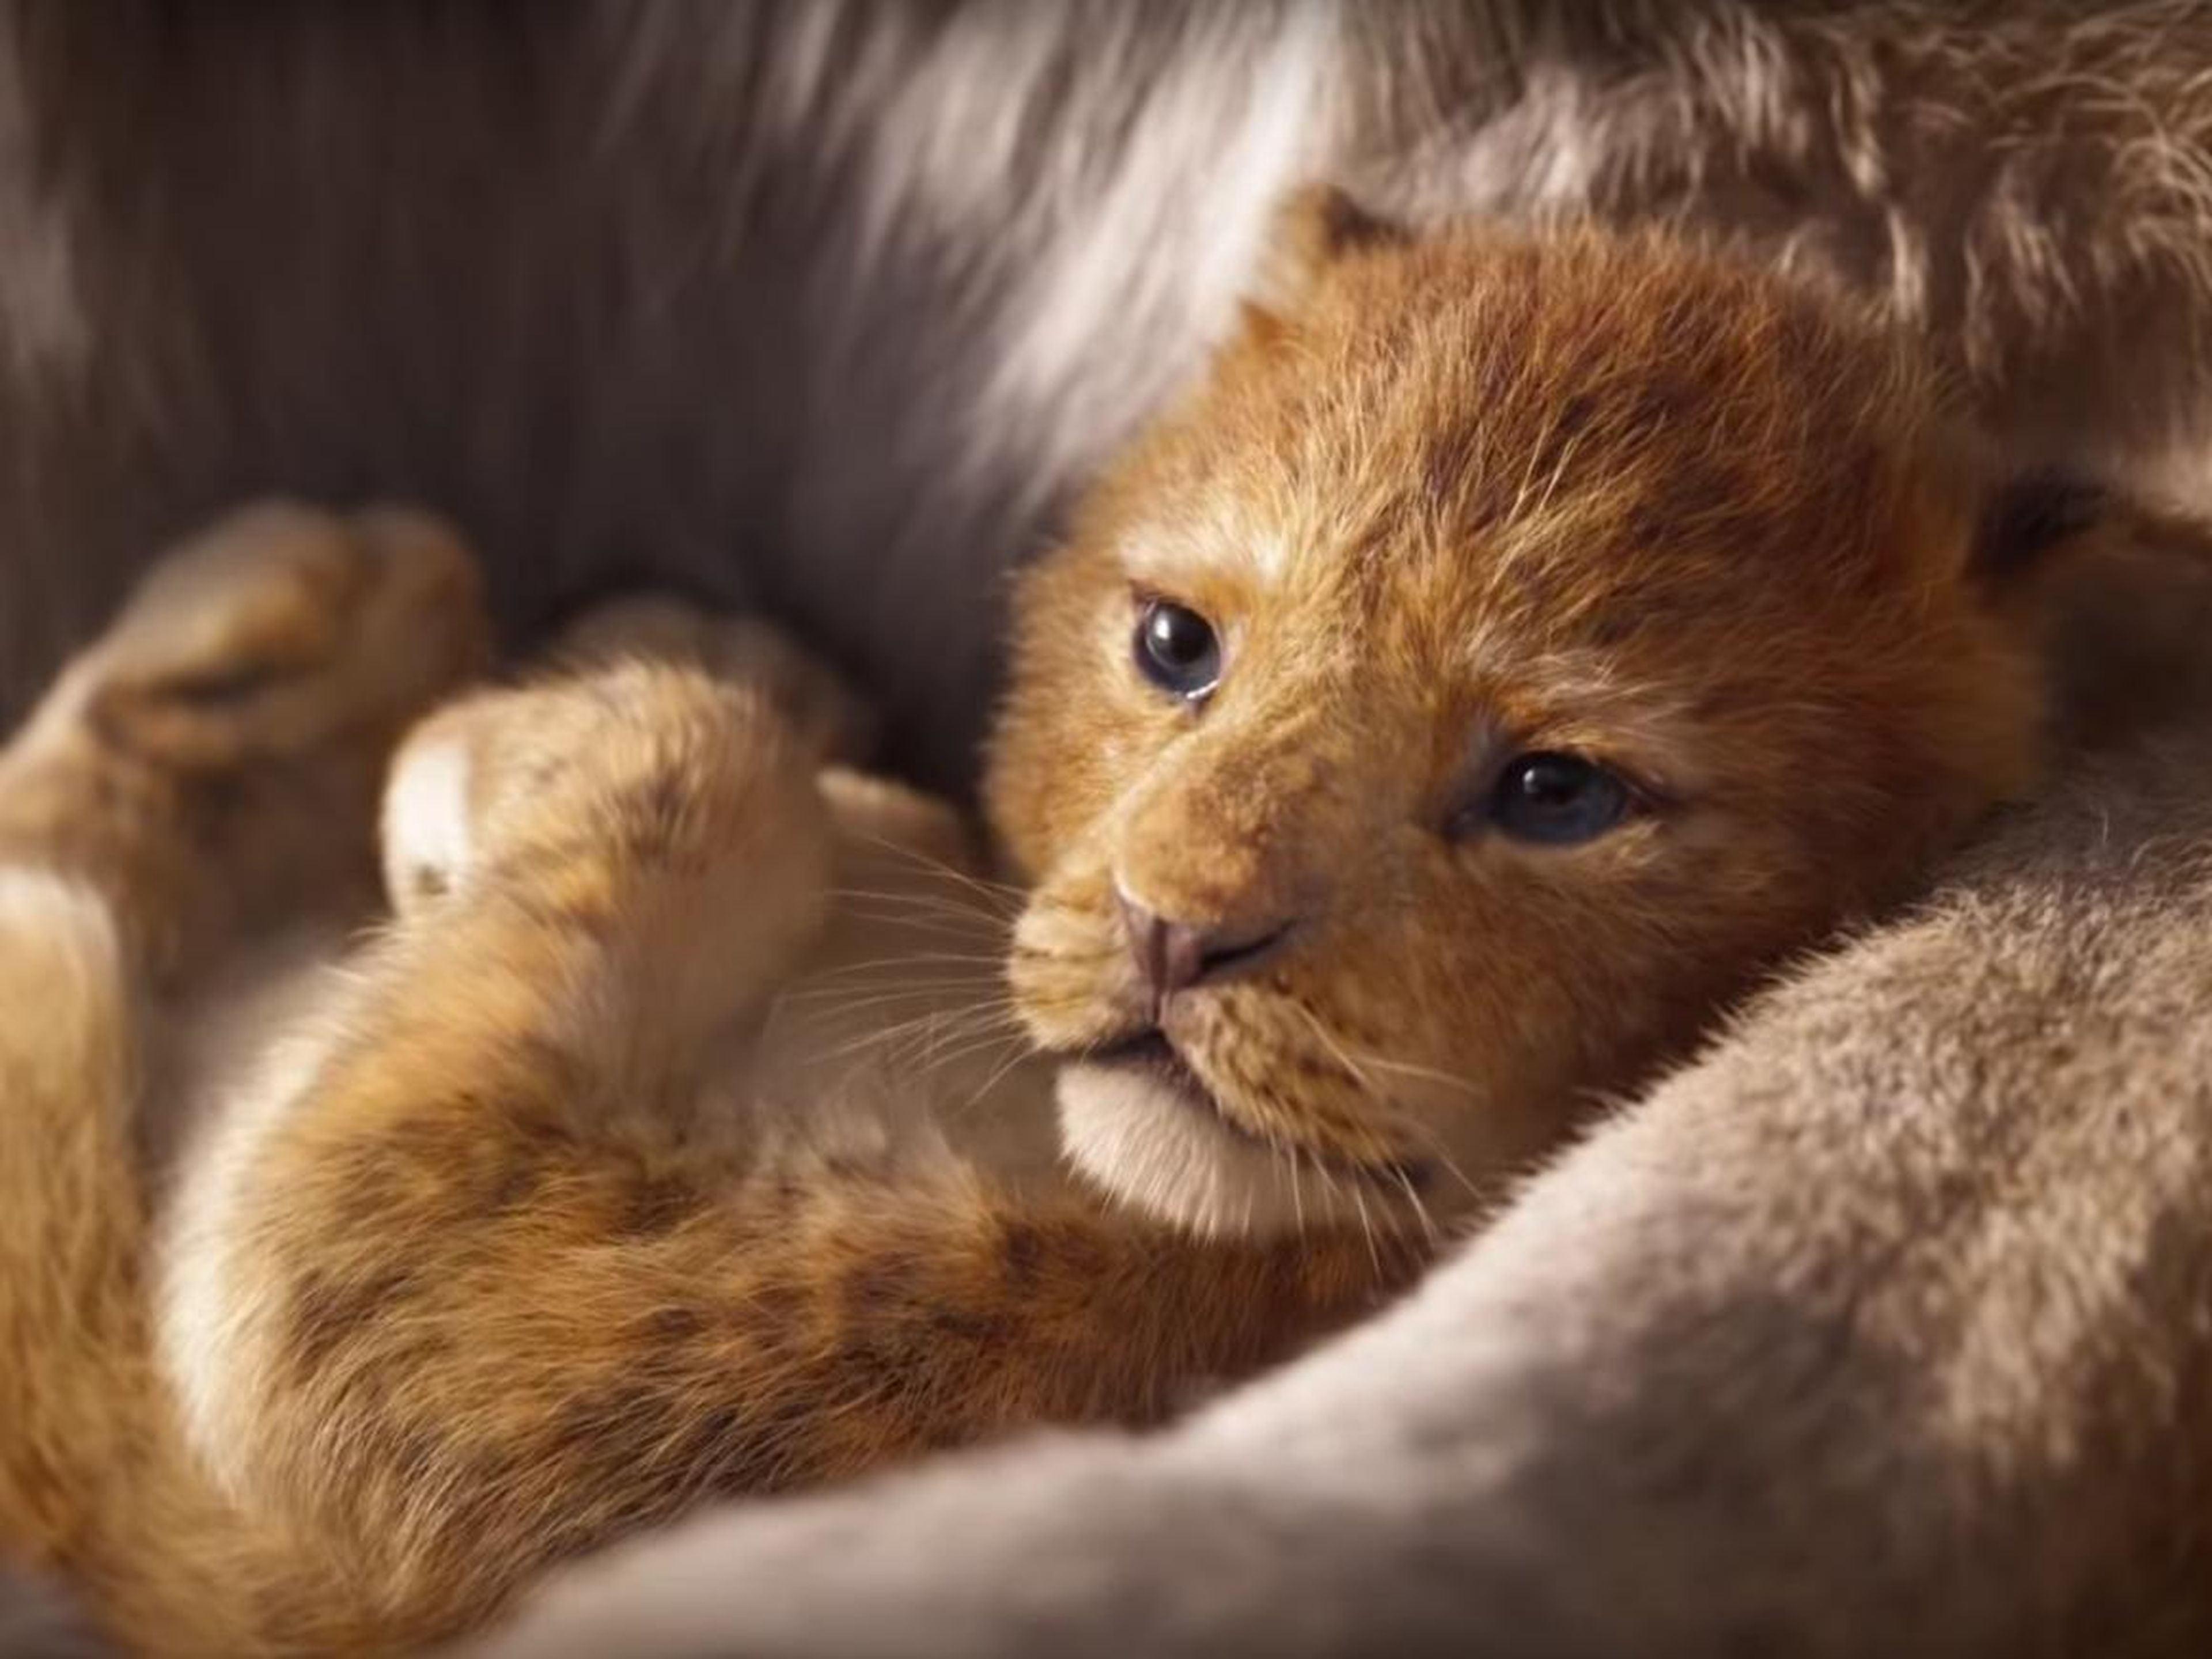 We're already in love with little Simba. "Atlanta's" Donald Glover will voice the adult version of the lion cub.